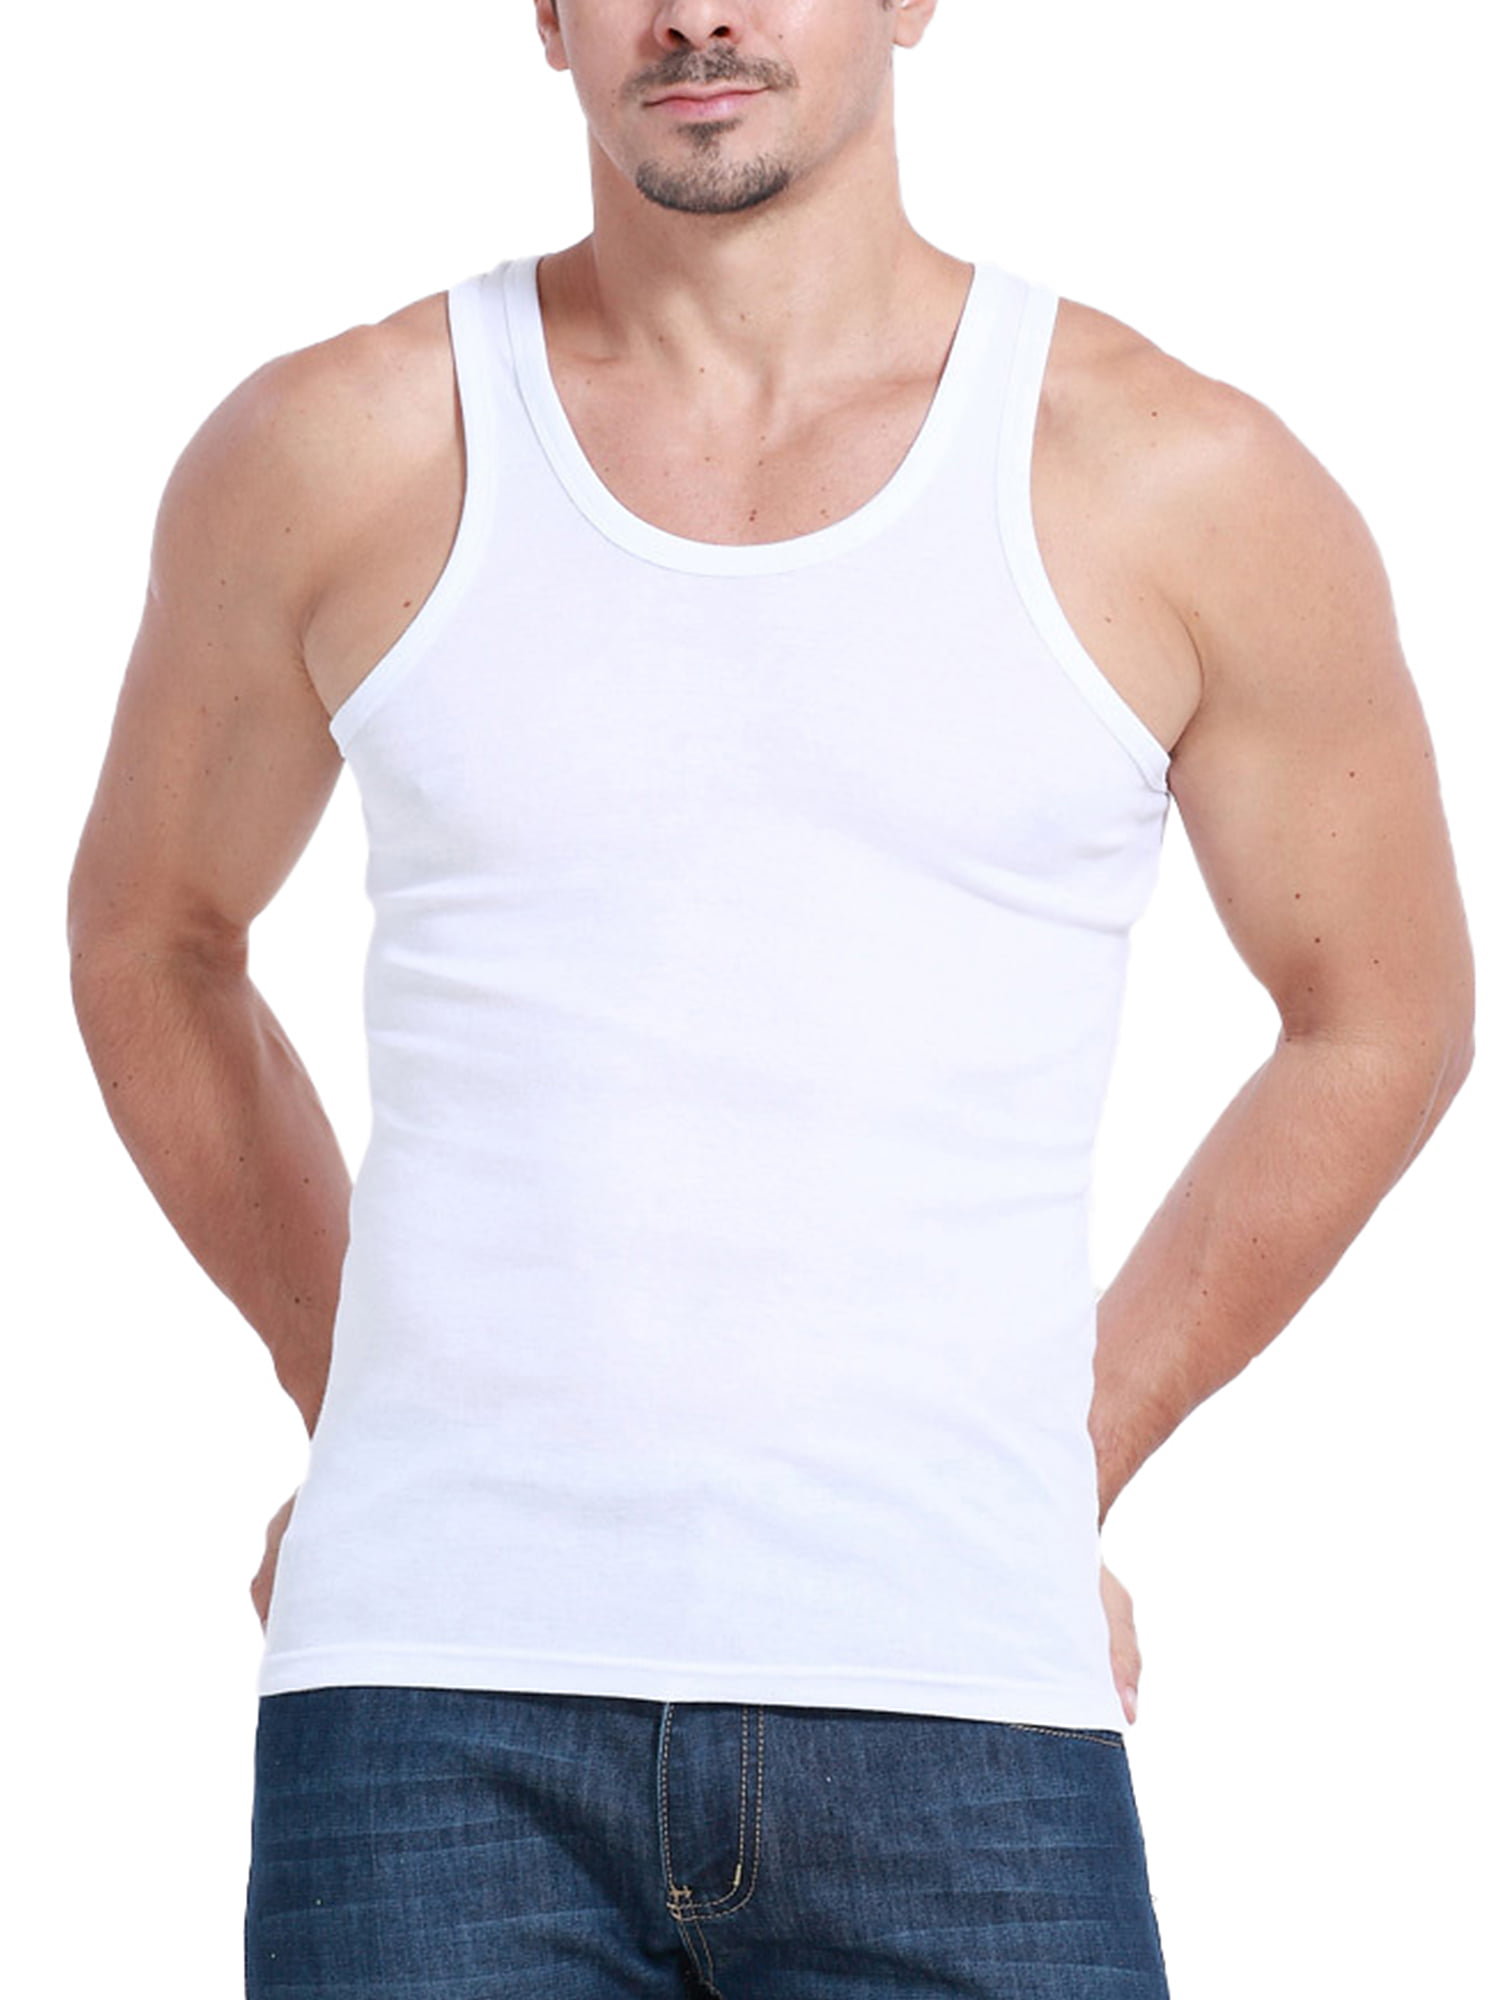 Save 8% Mens Clothing T-shirts Sleeveless t-shirts for Men DSquared² Cotton Vest T-shirt in Orange Red 